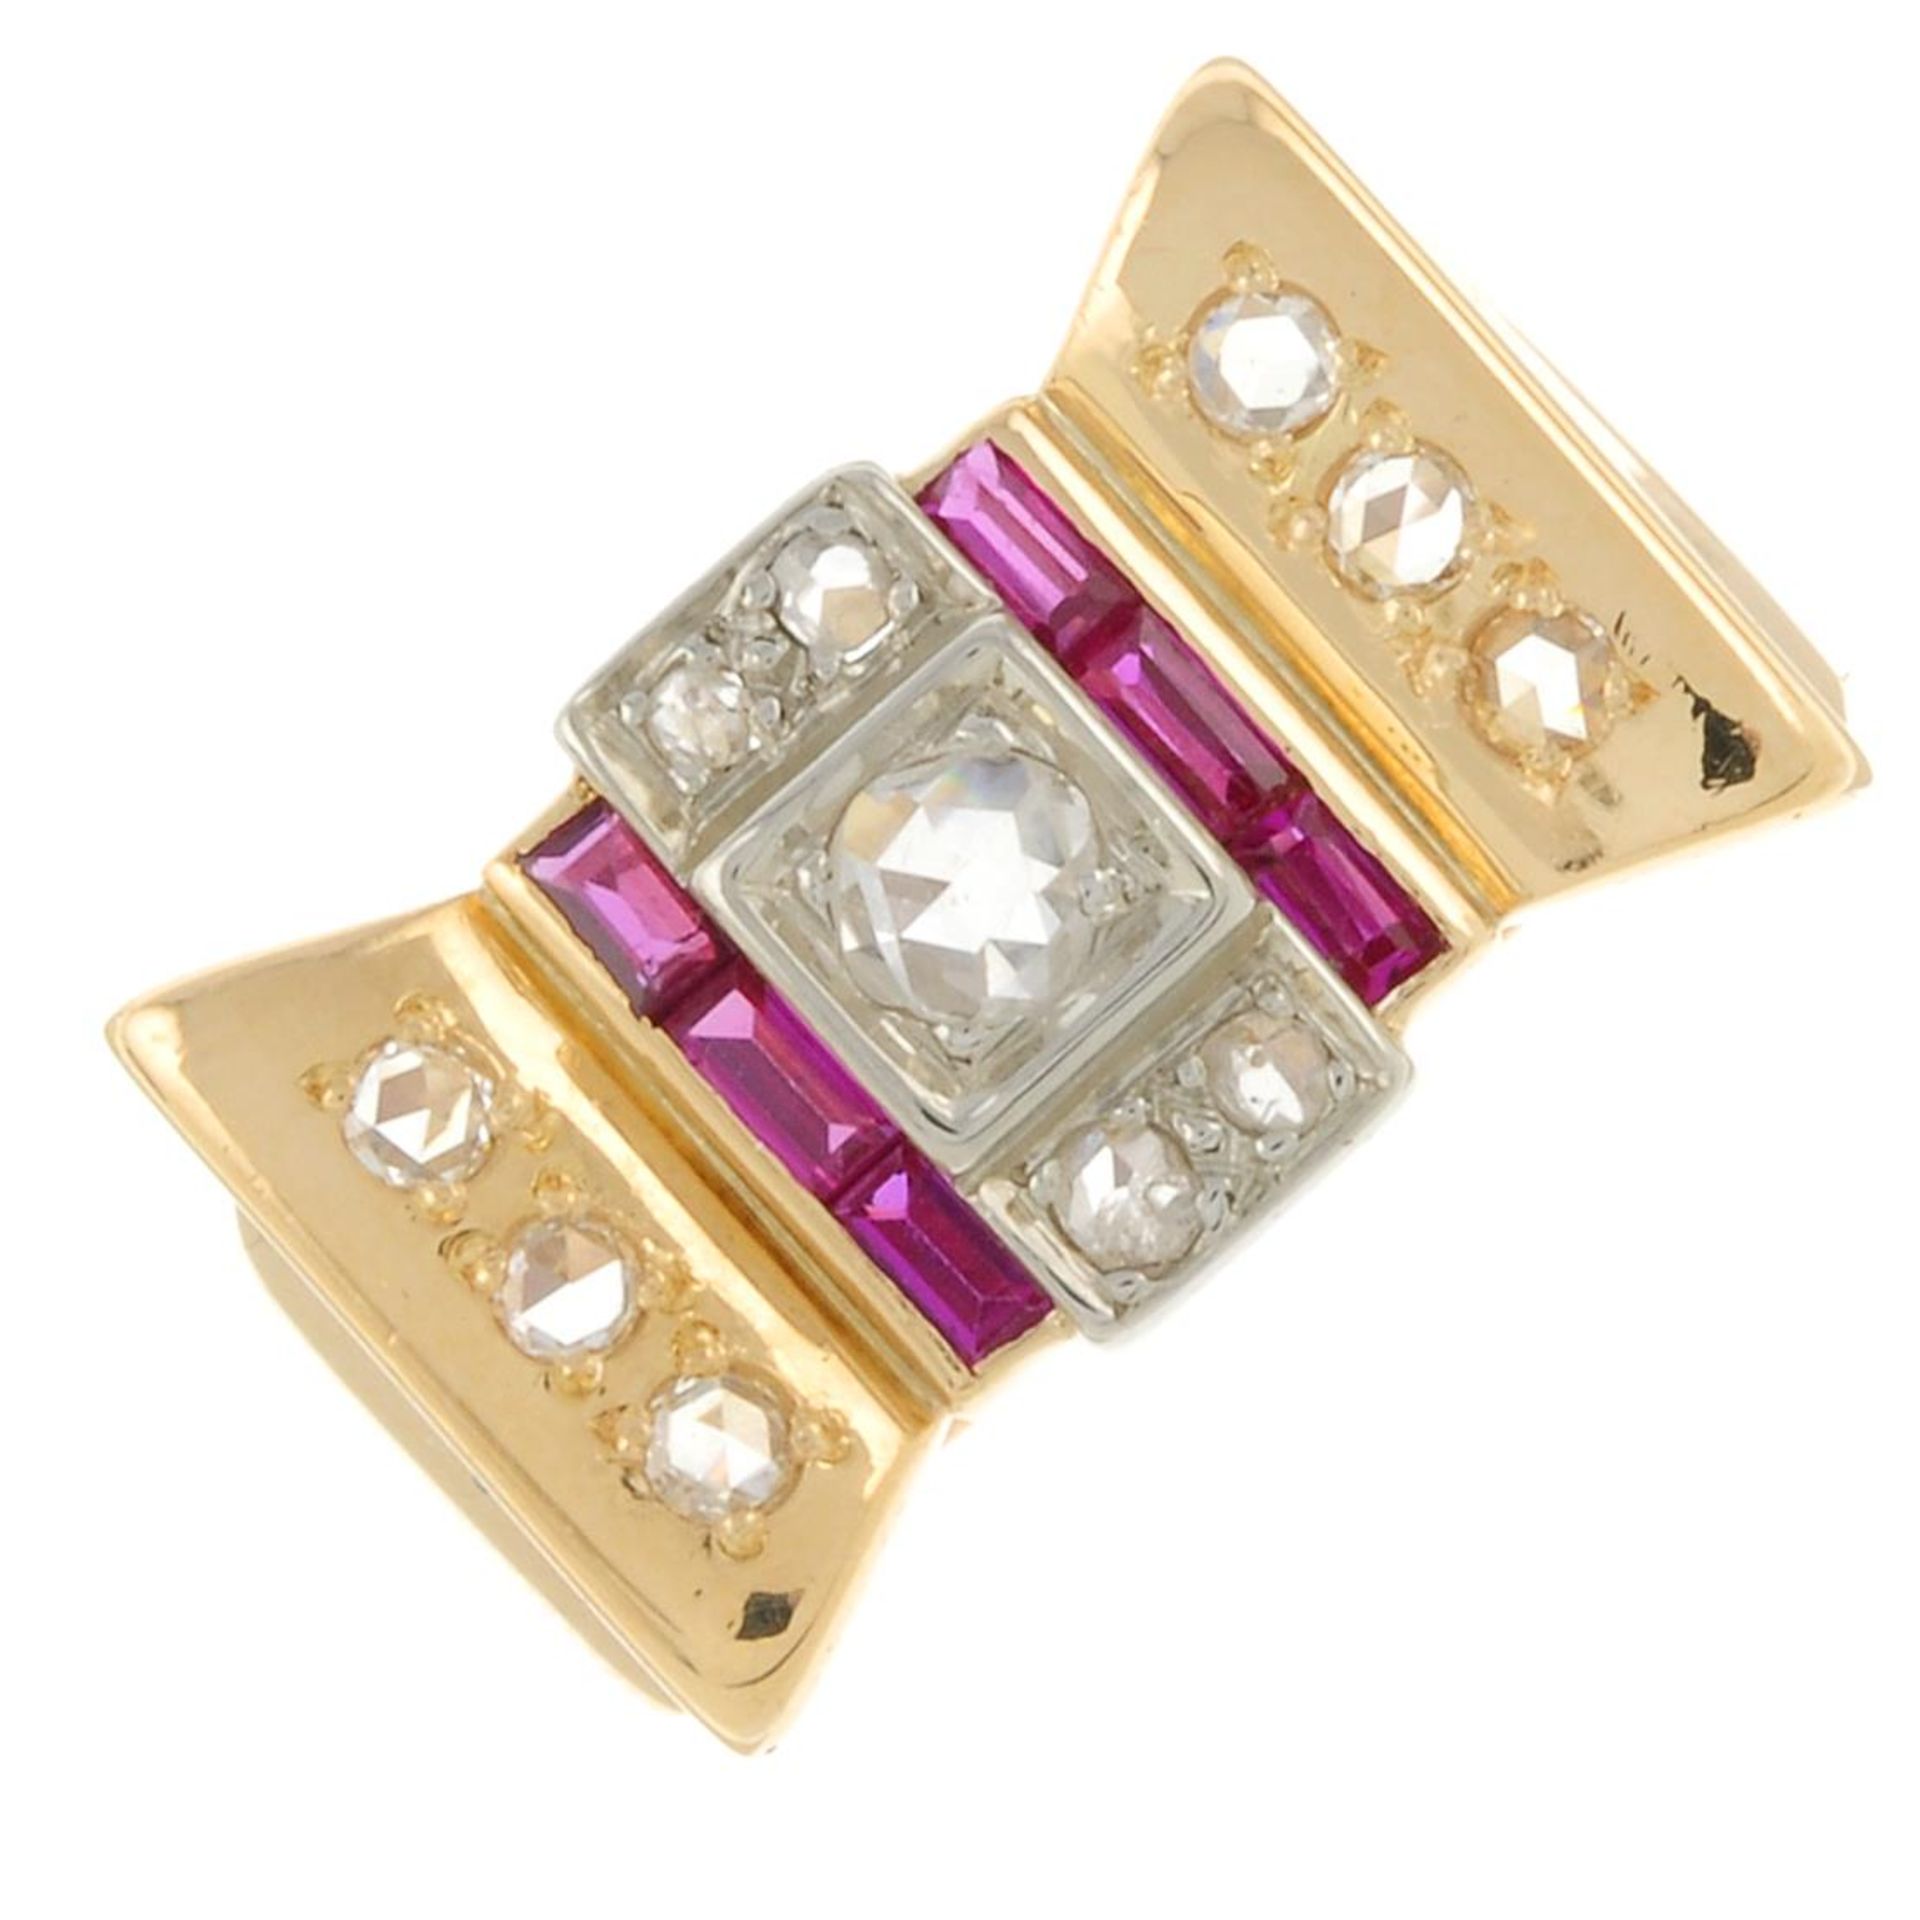 A 14ct gold ruby and rose-cut diamond dress ring.